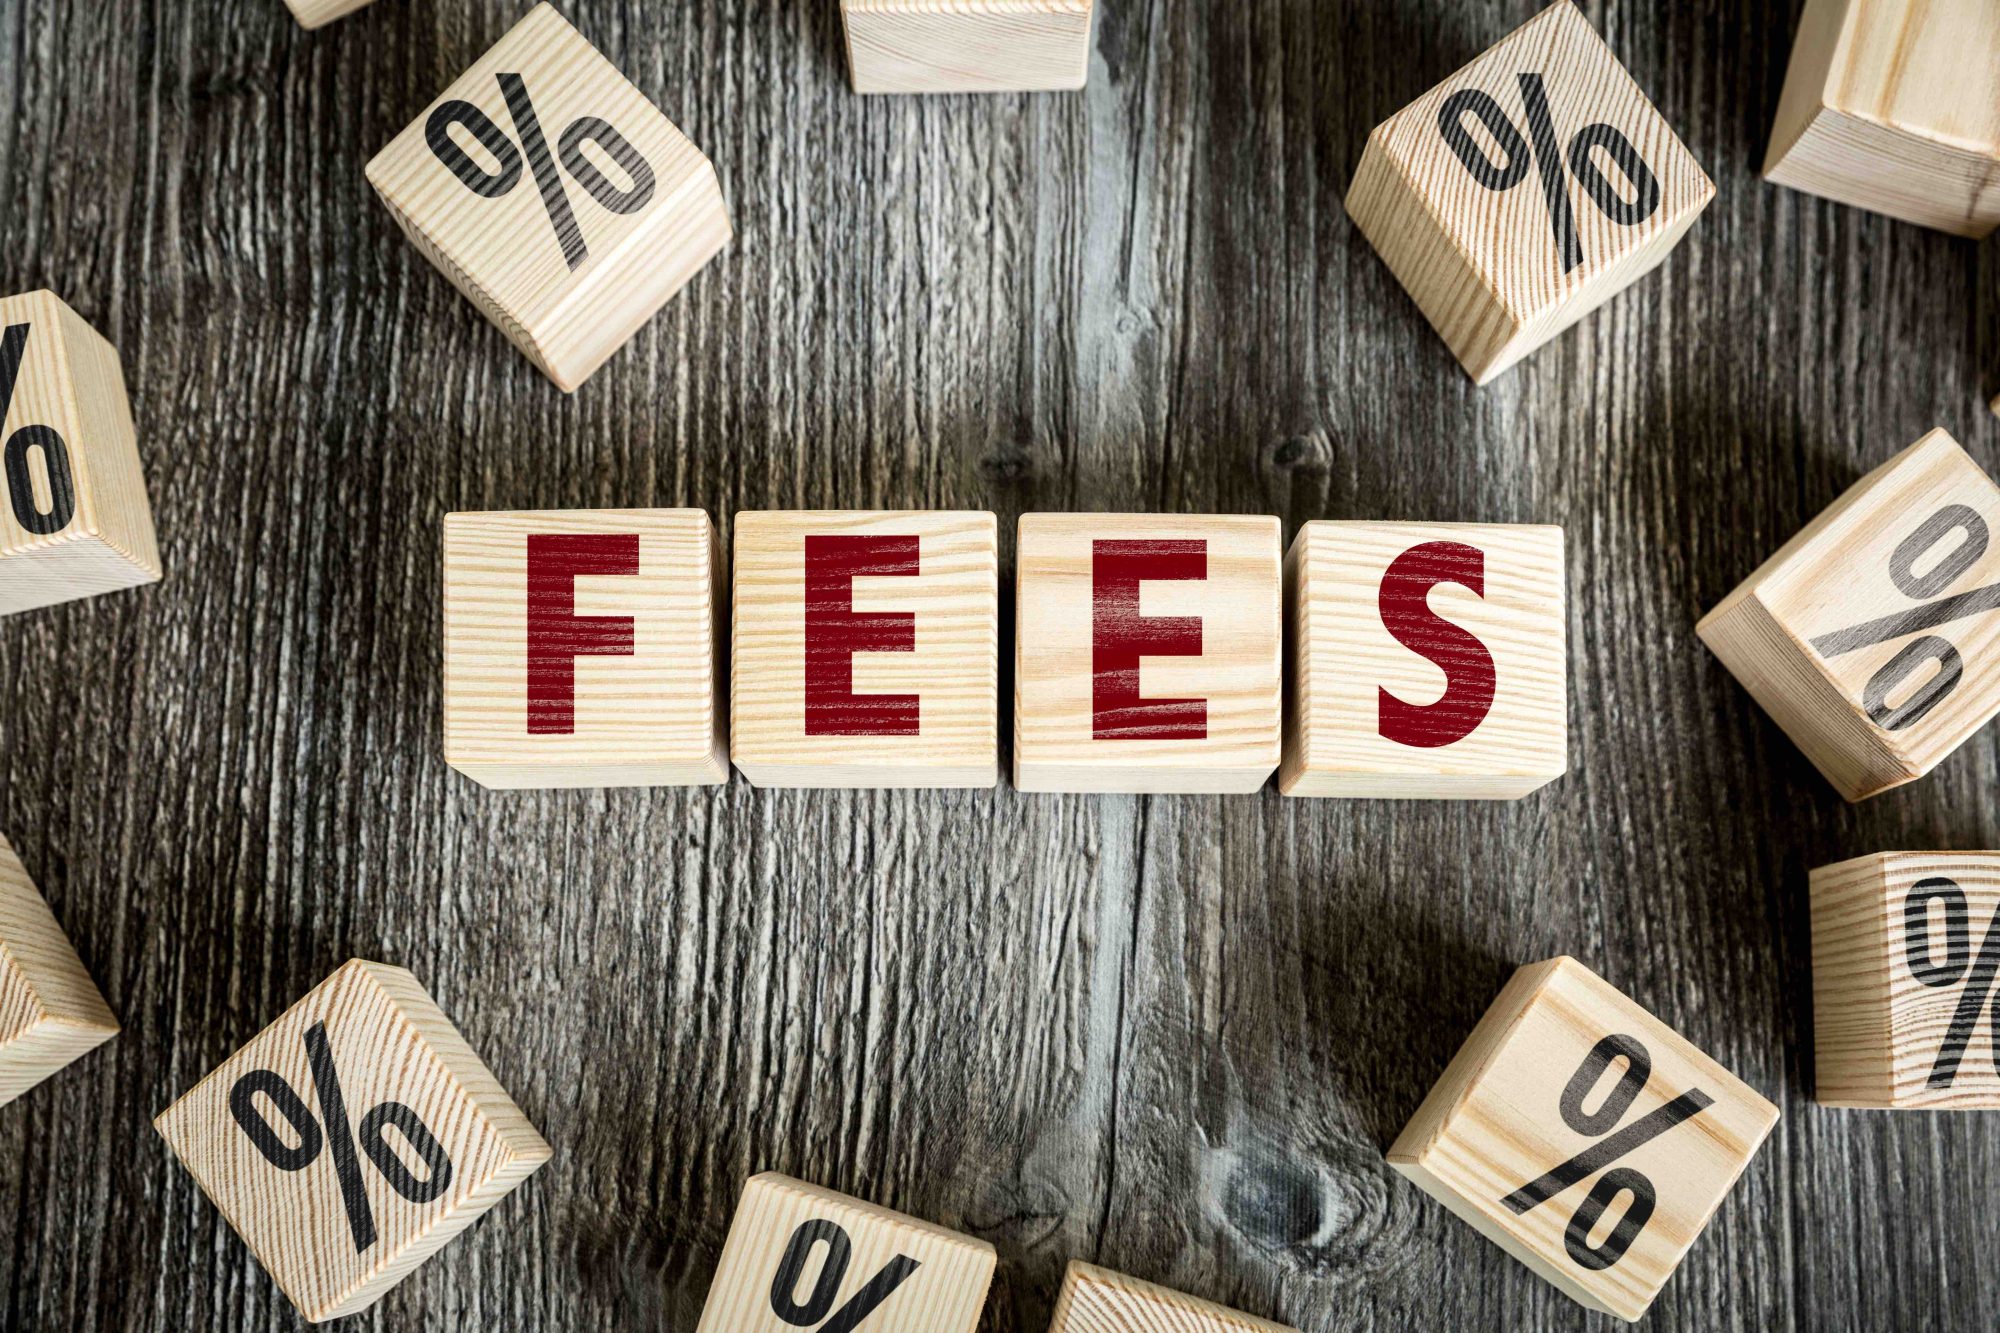 Professor Michael Cooper in the New York Times to discuss fees